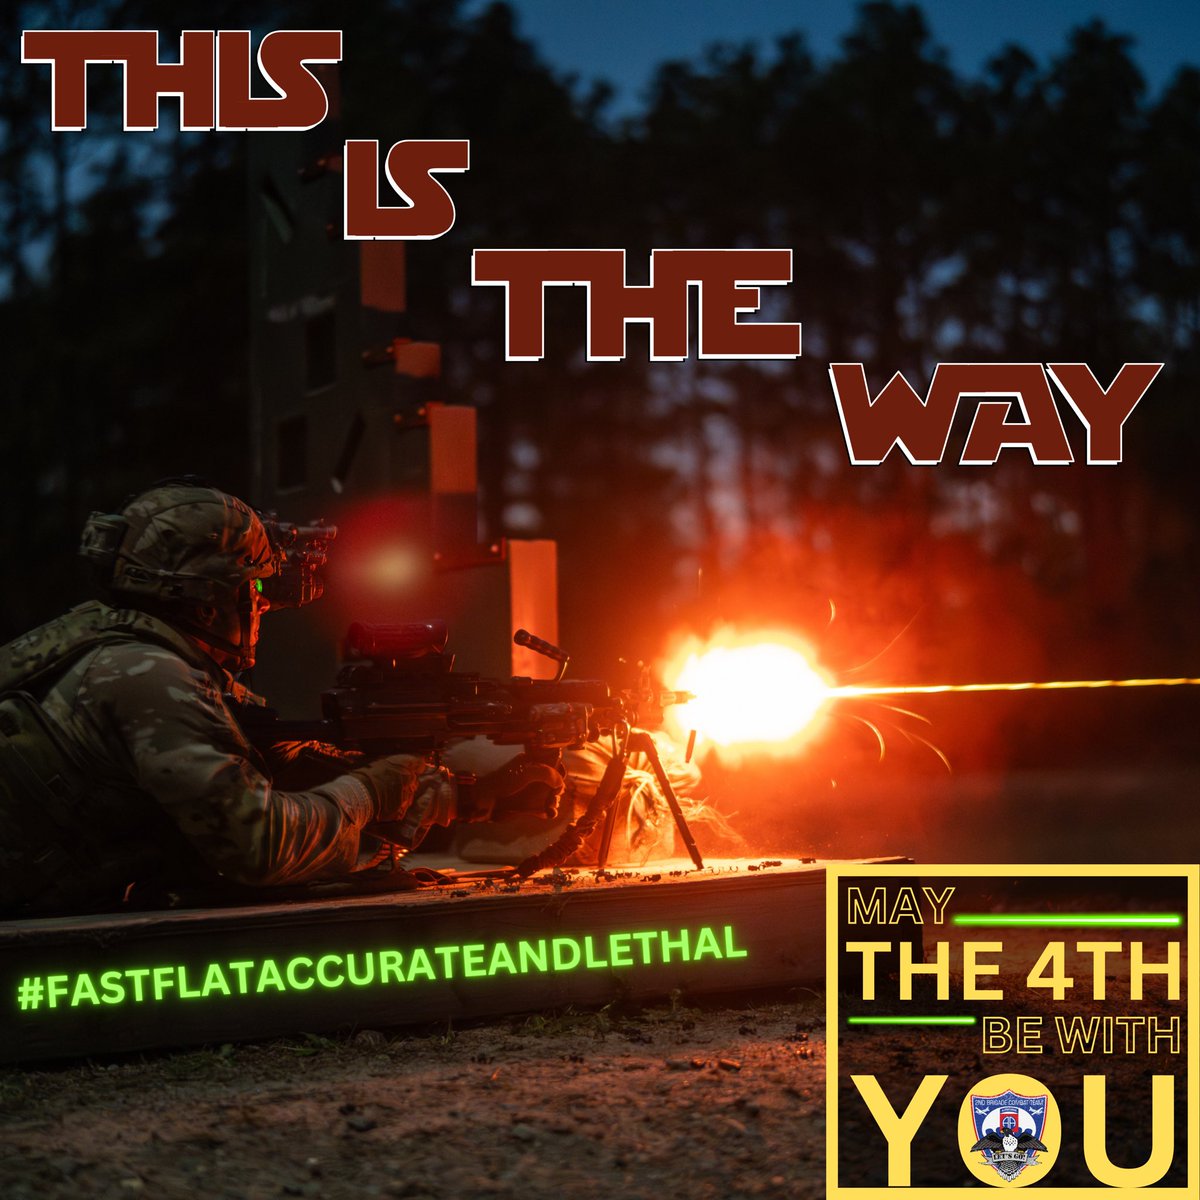 😎 #MayThe4thBeWithYou

LET’S GO! 

#FastFlatAccurateandLethal #FalconBrigade #BeAllYouCanBe #AlwaysReady #AATW